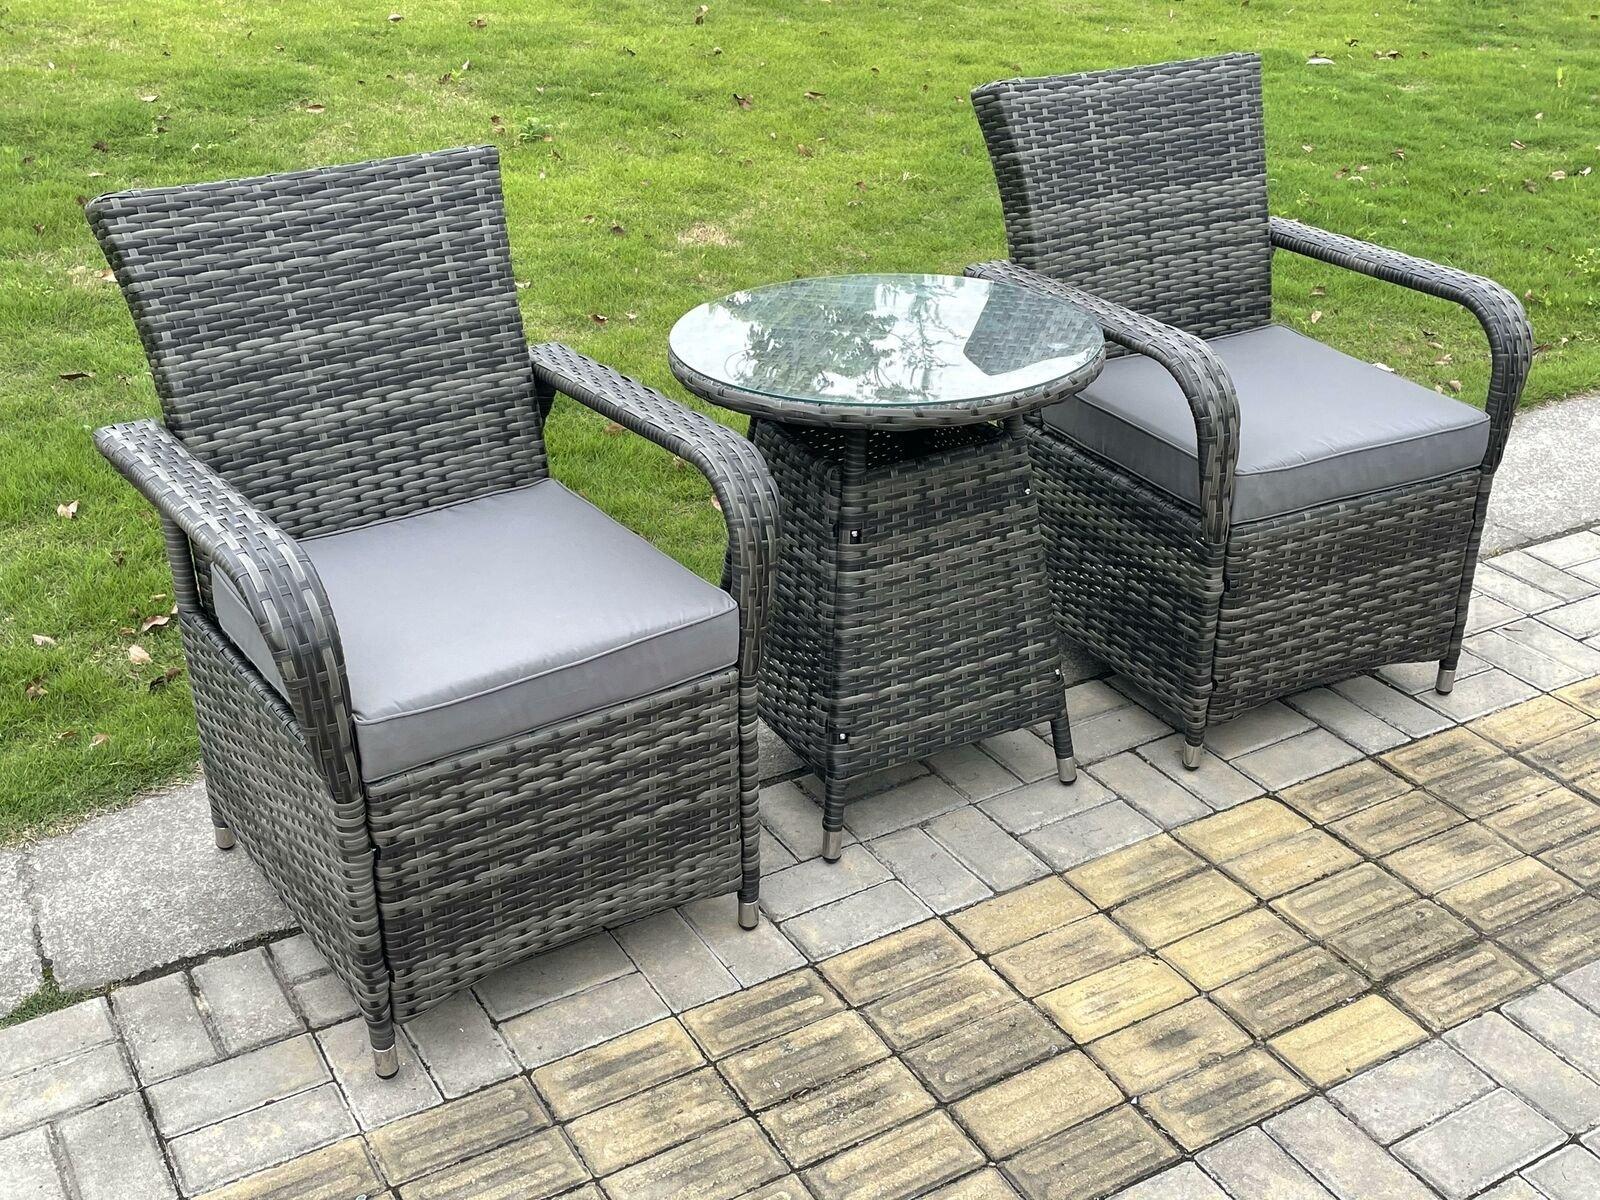 Rattan Garden Furniture Dining Set Table And Chairs WiCker Patio Outdoor 2 Chairs Plus Small Round T